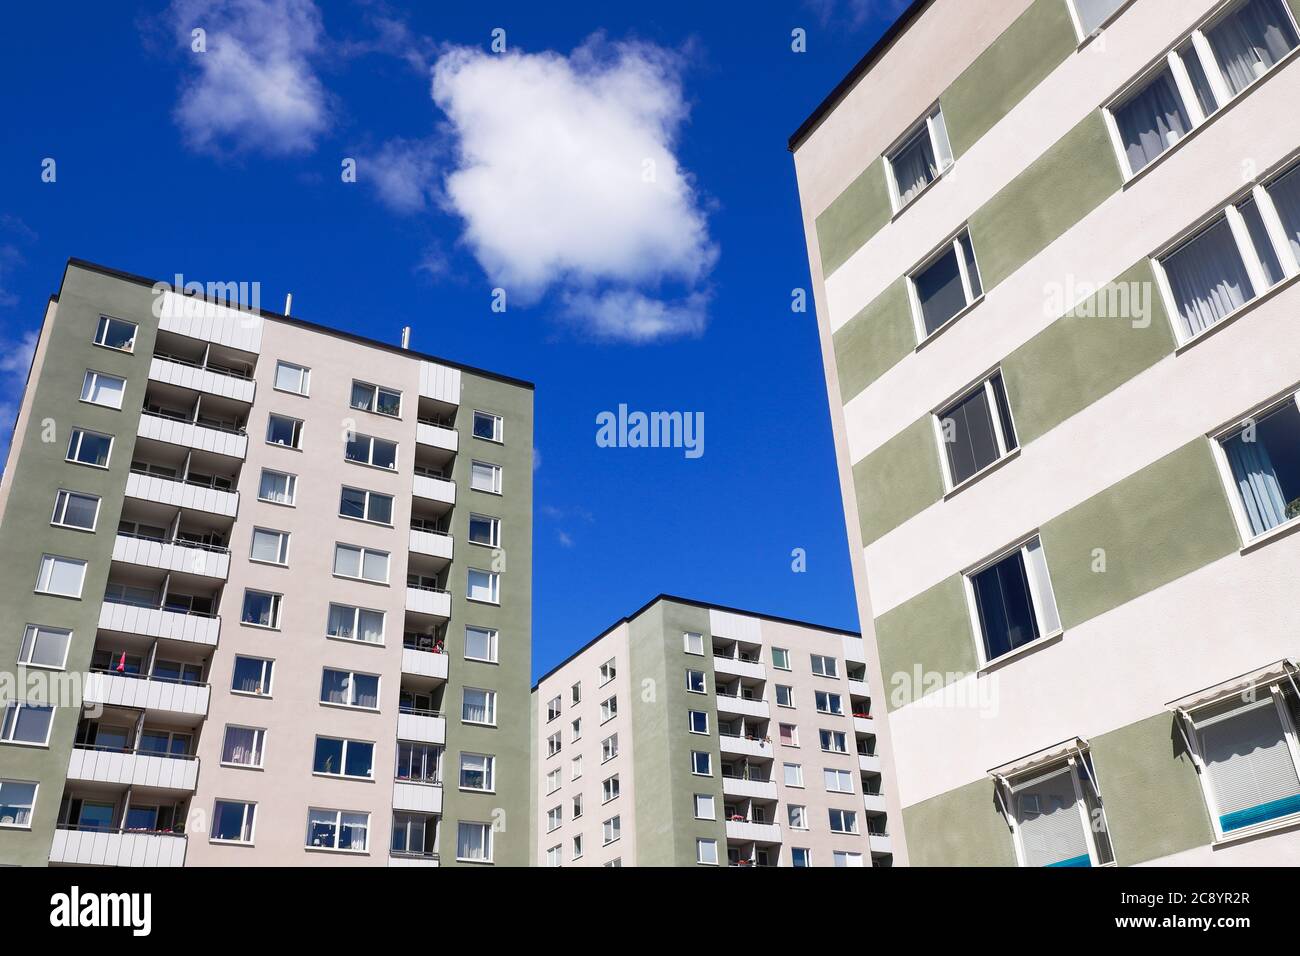 Low angle view of three mid 1960s era multi storey residential buildings. Stock Photo